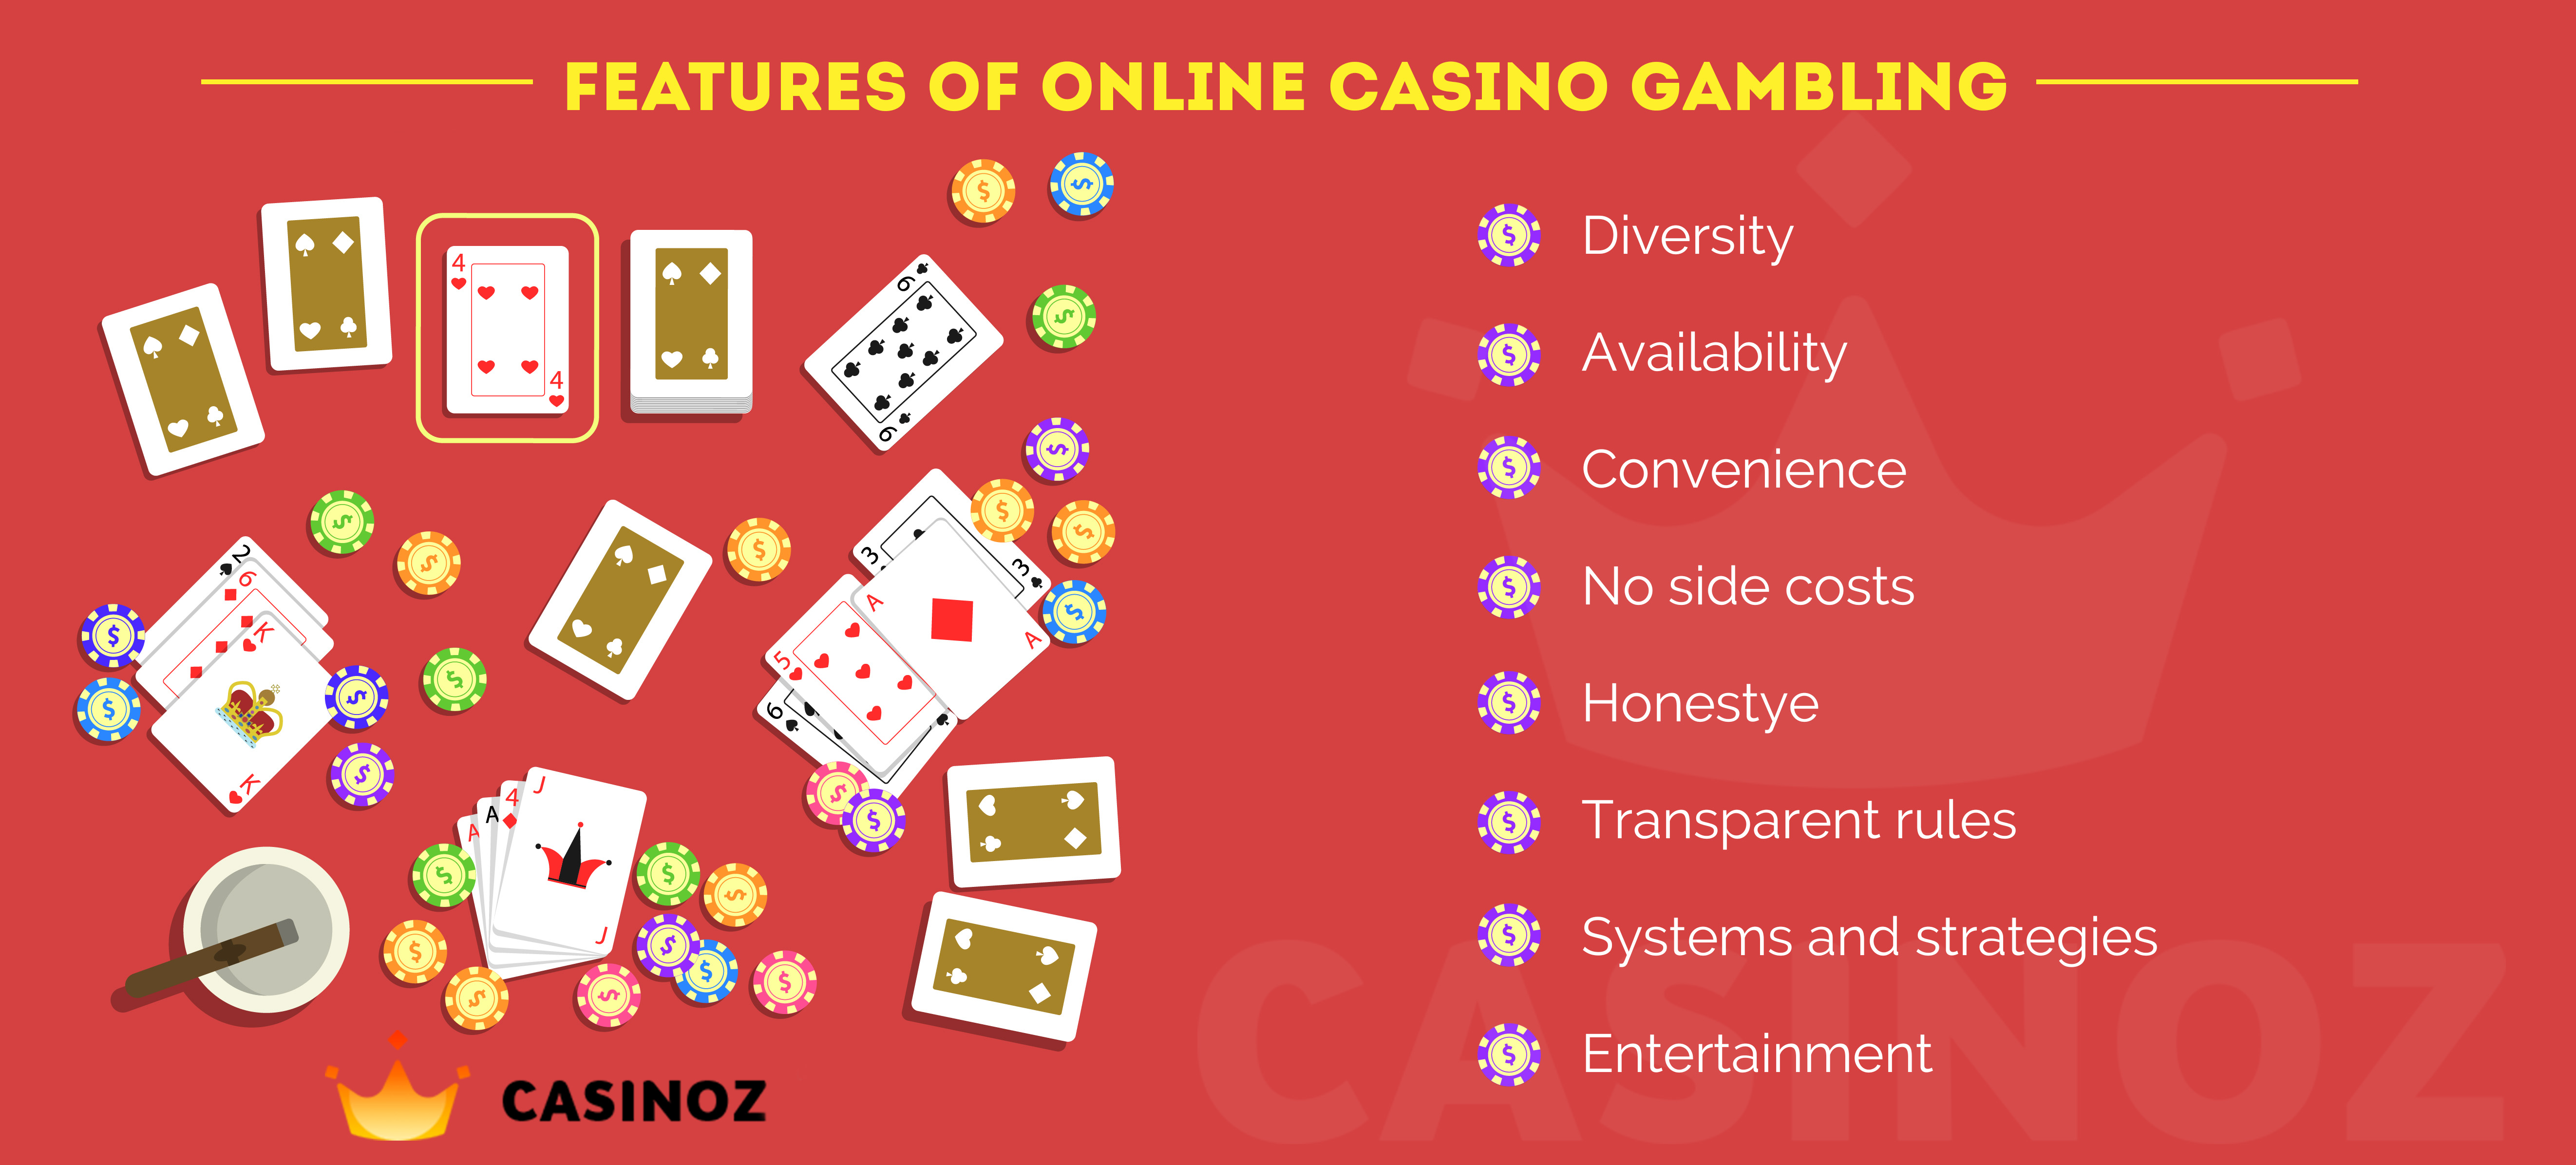 casino table game free play online